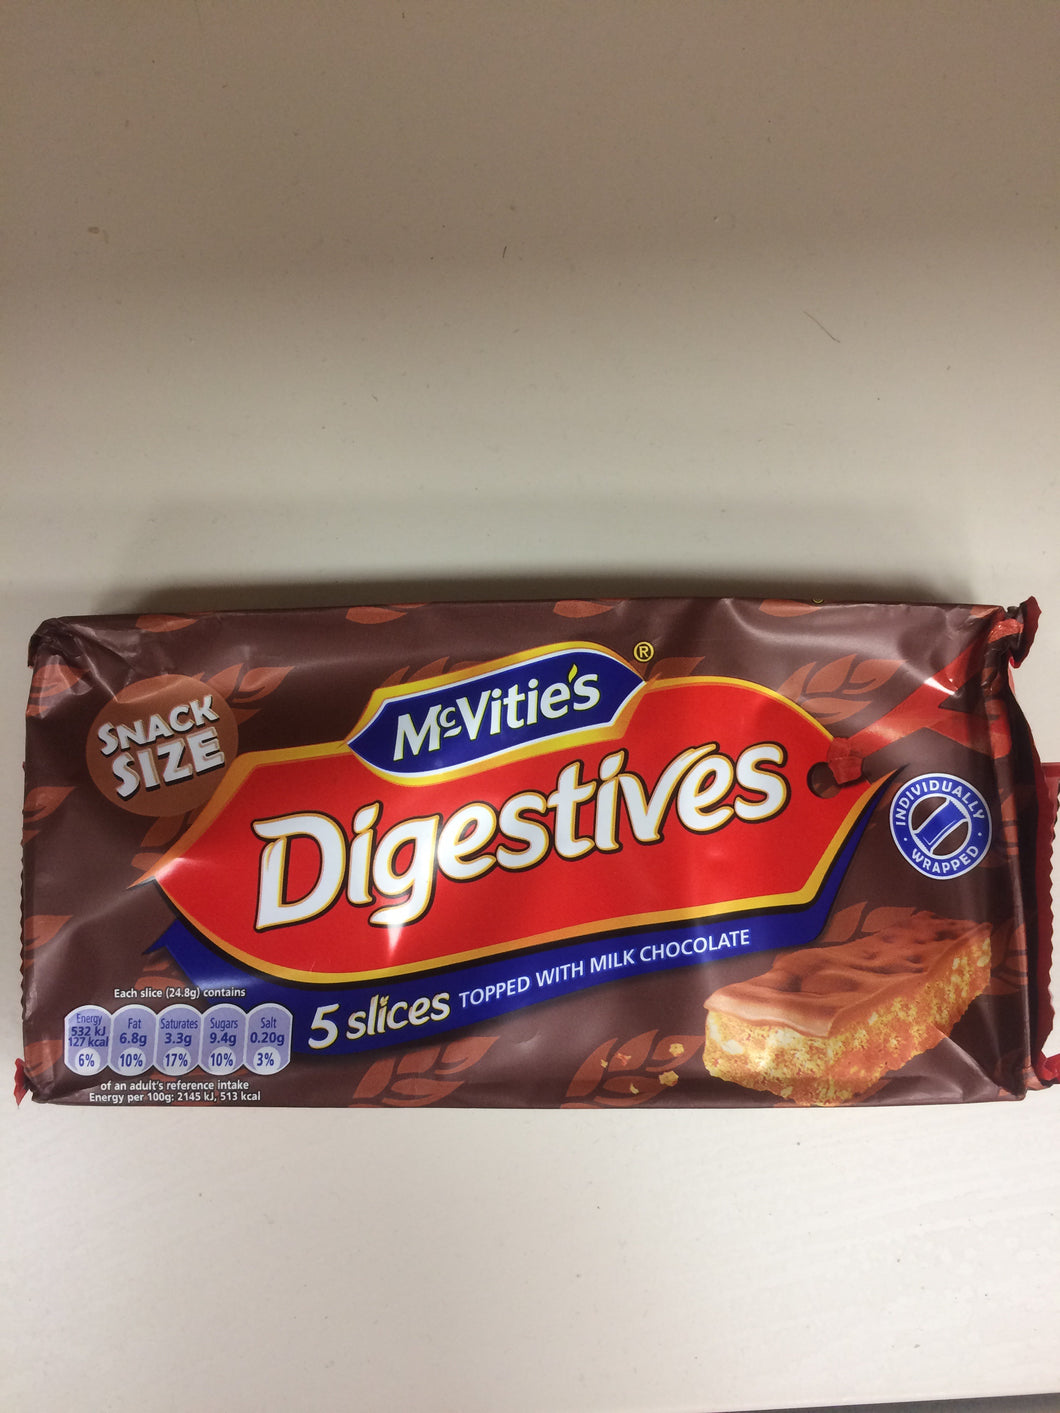 McVities Digestives 5 Slices Topped with Chocolate 114g PM£1